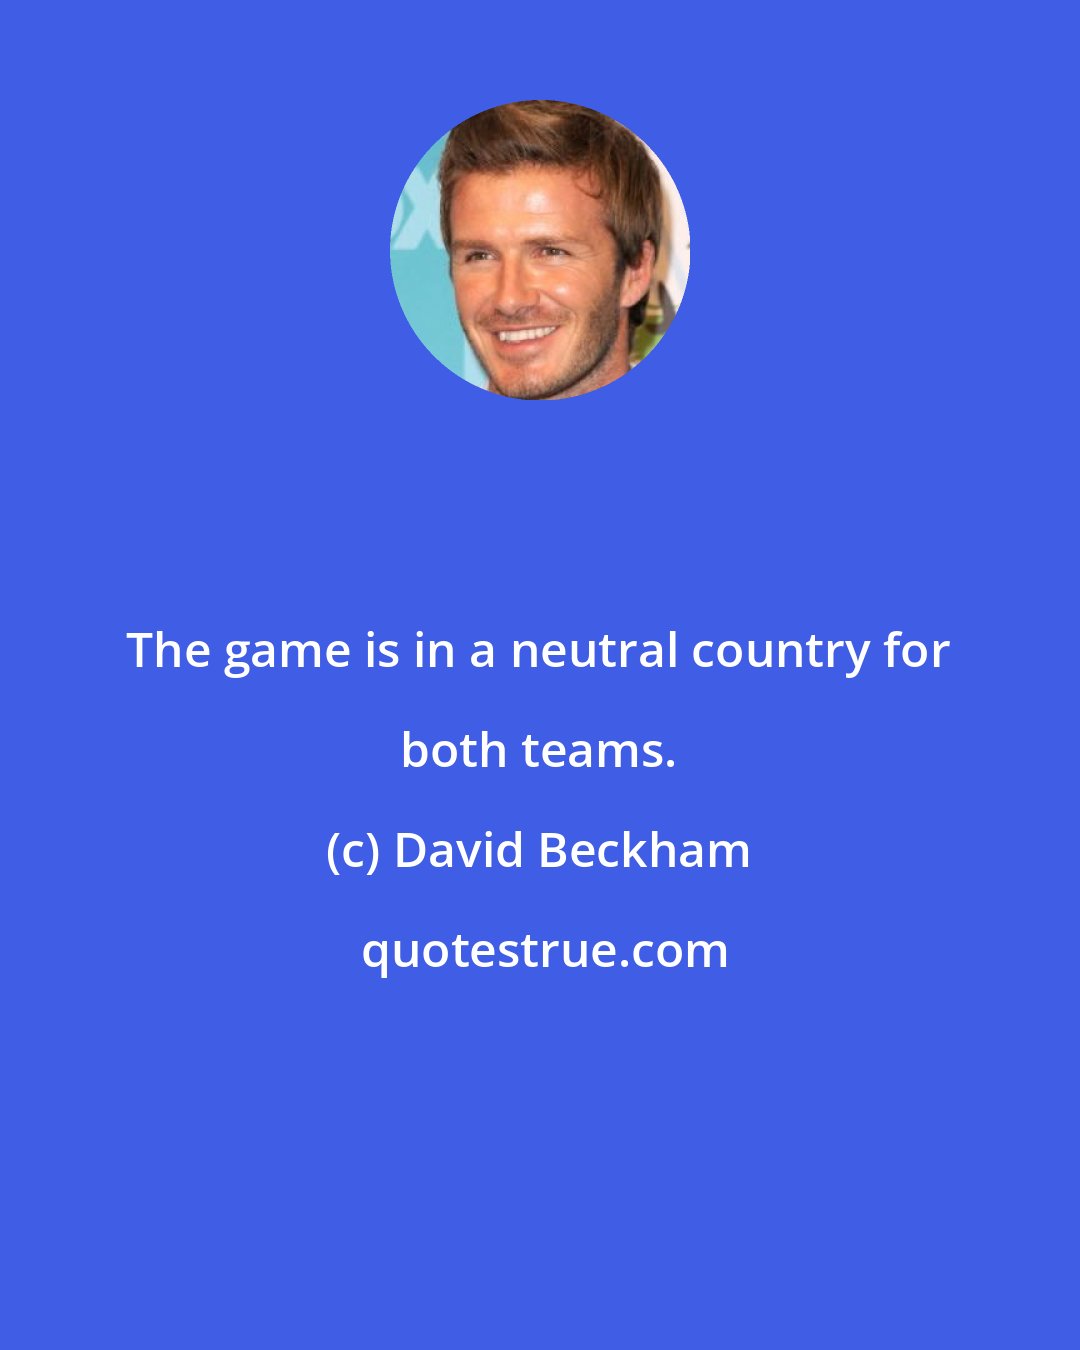 David Beckham: The game is in a neutral country for both teams.